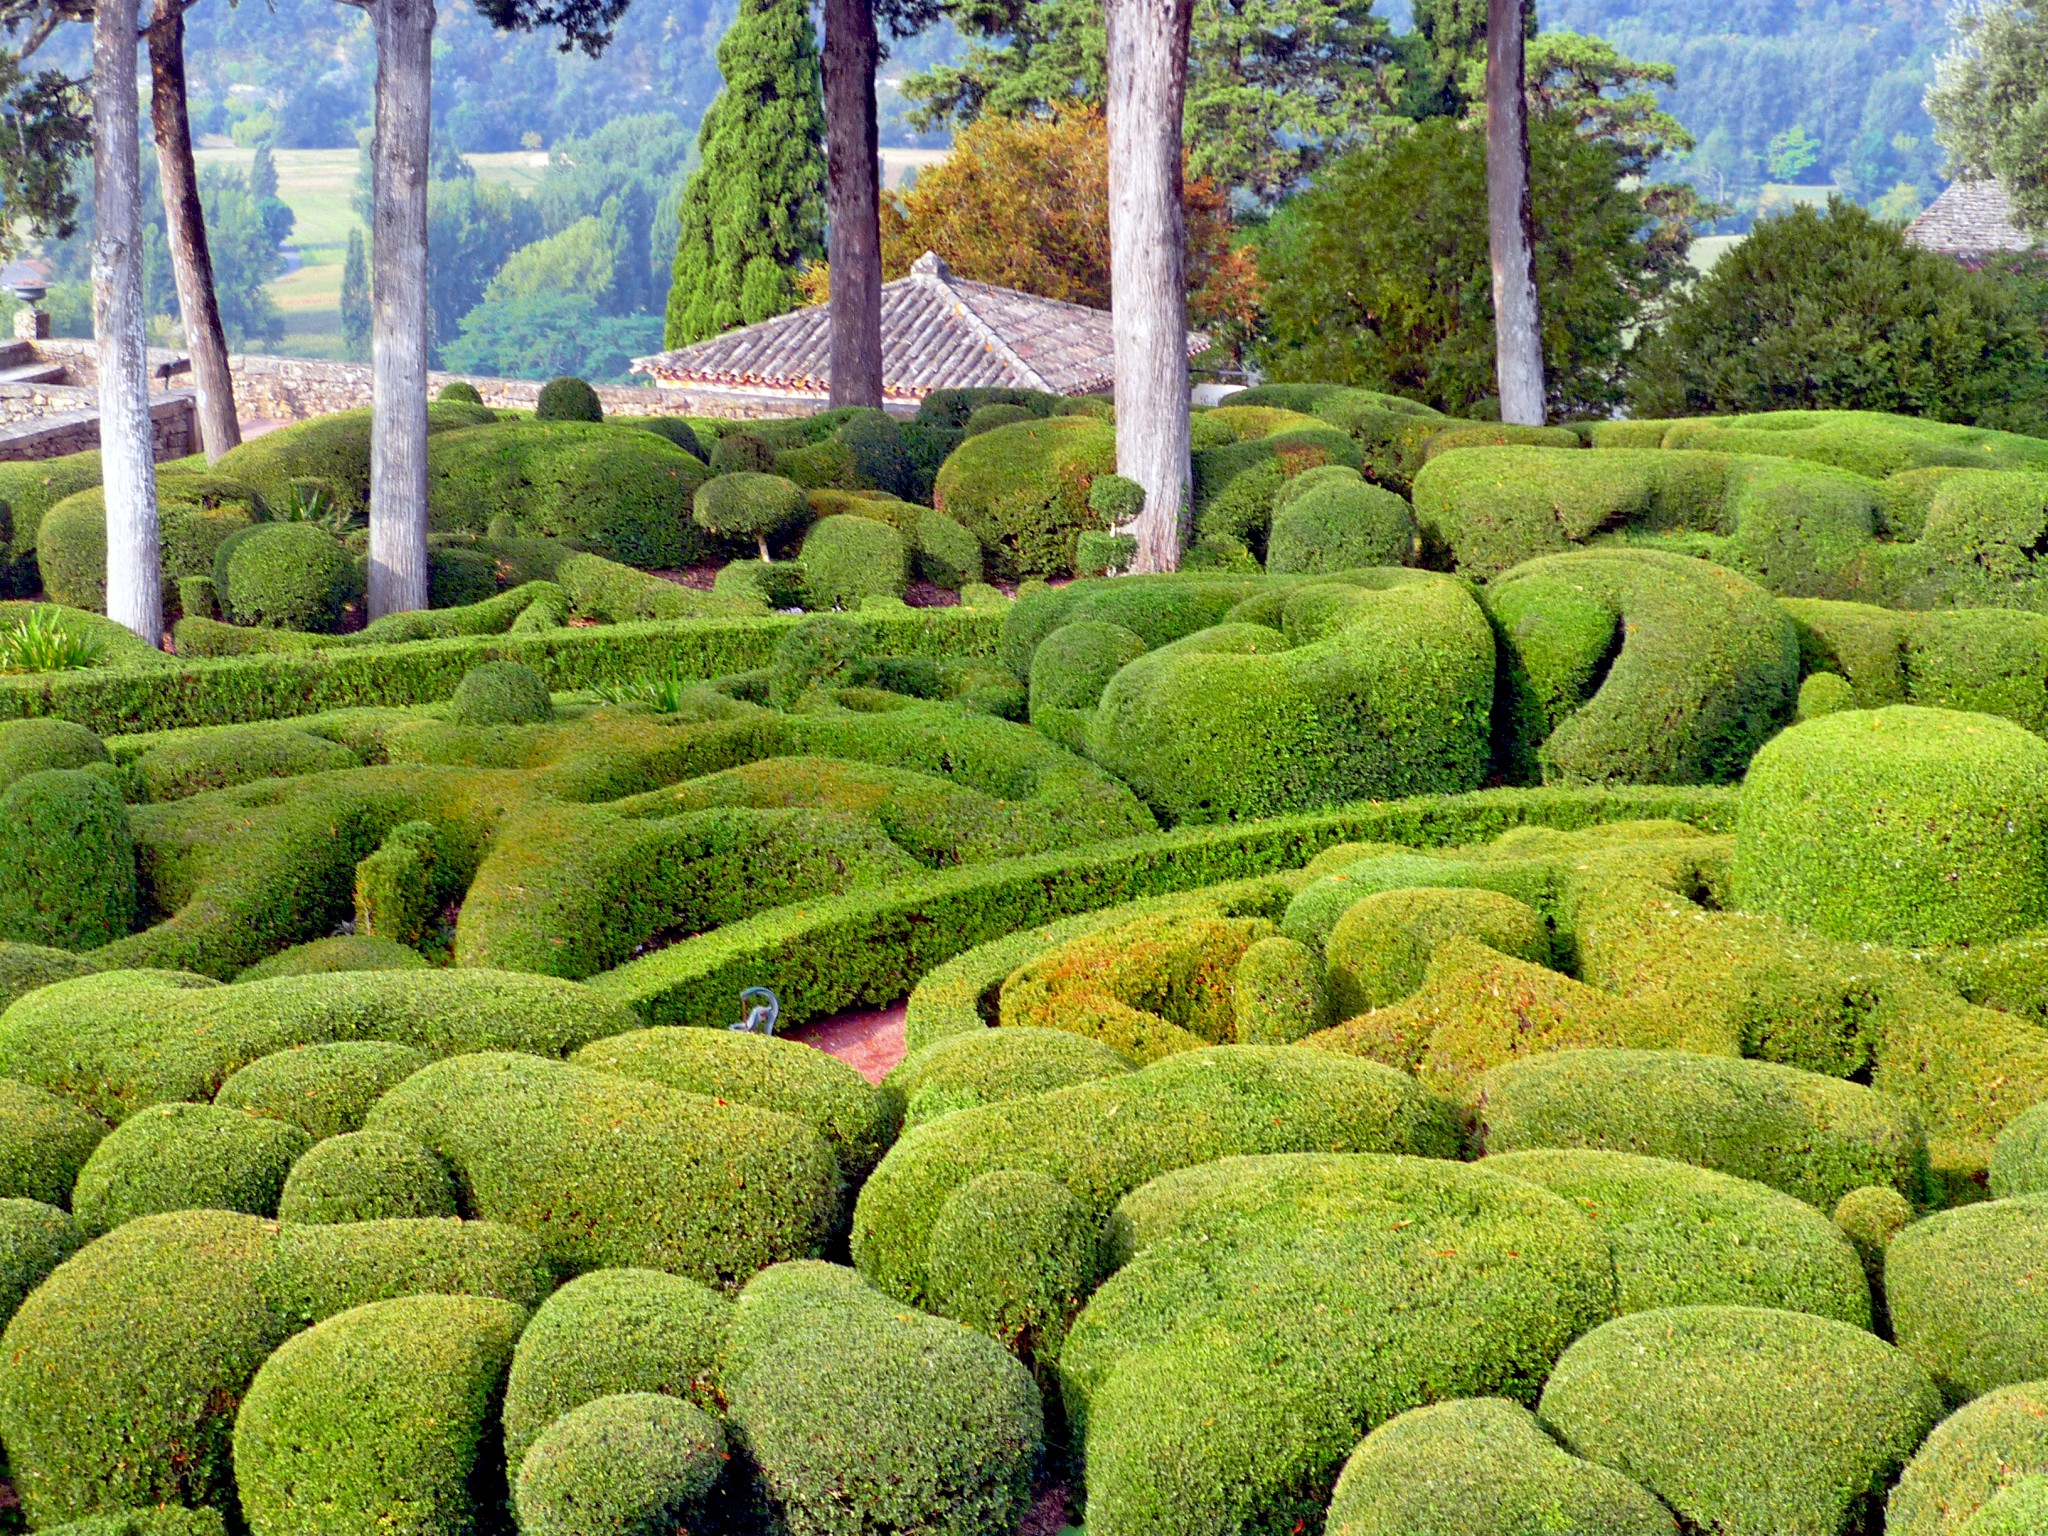 The gardens of Marqueyssac © French Moments